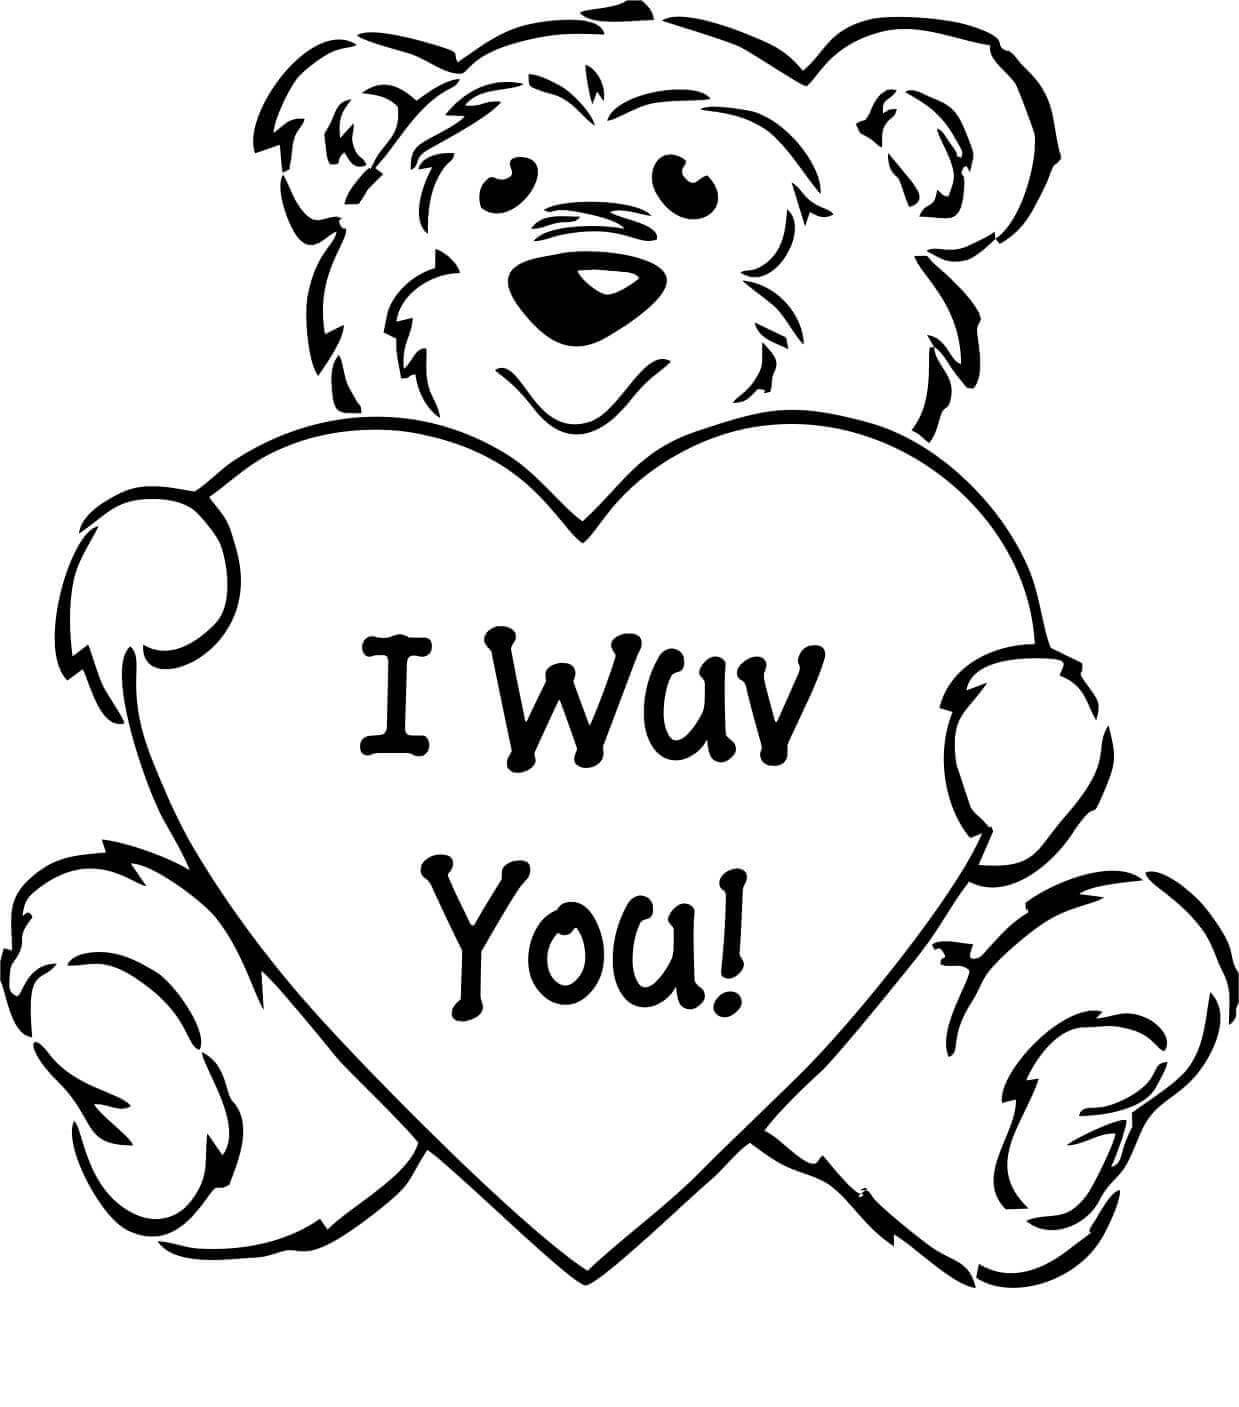 Free Printable Valentine s Day Coloring Pages